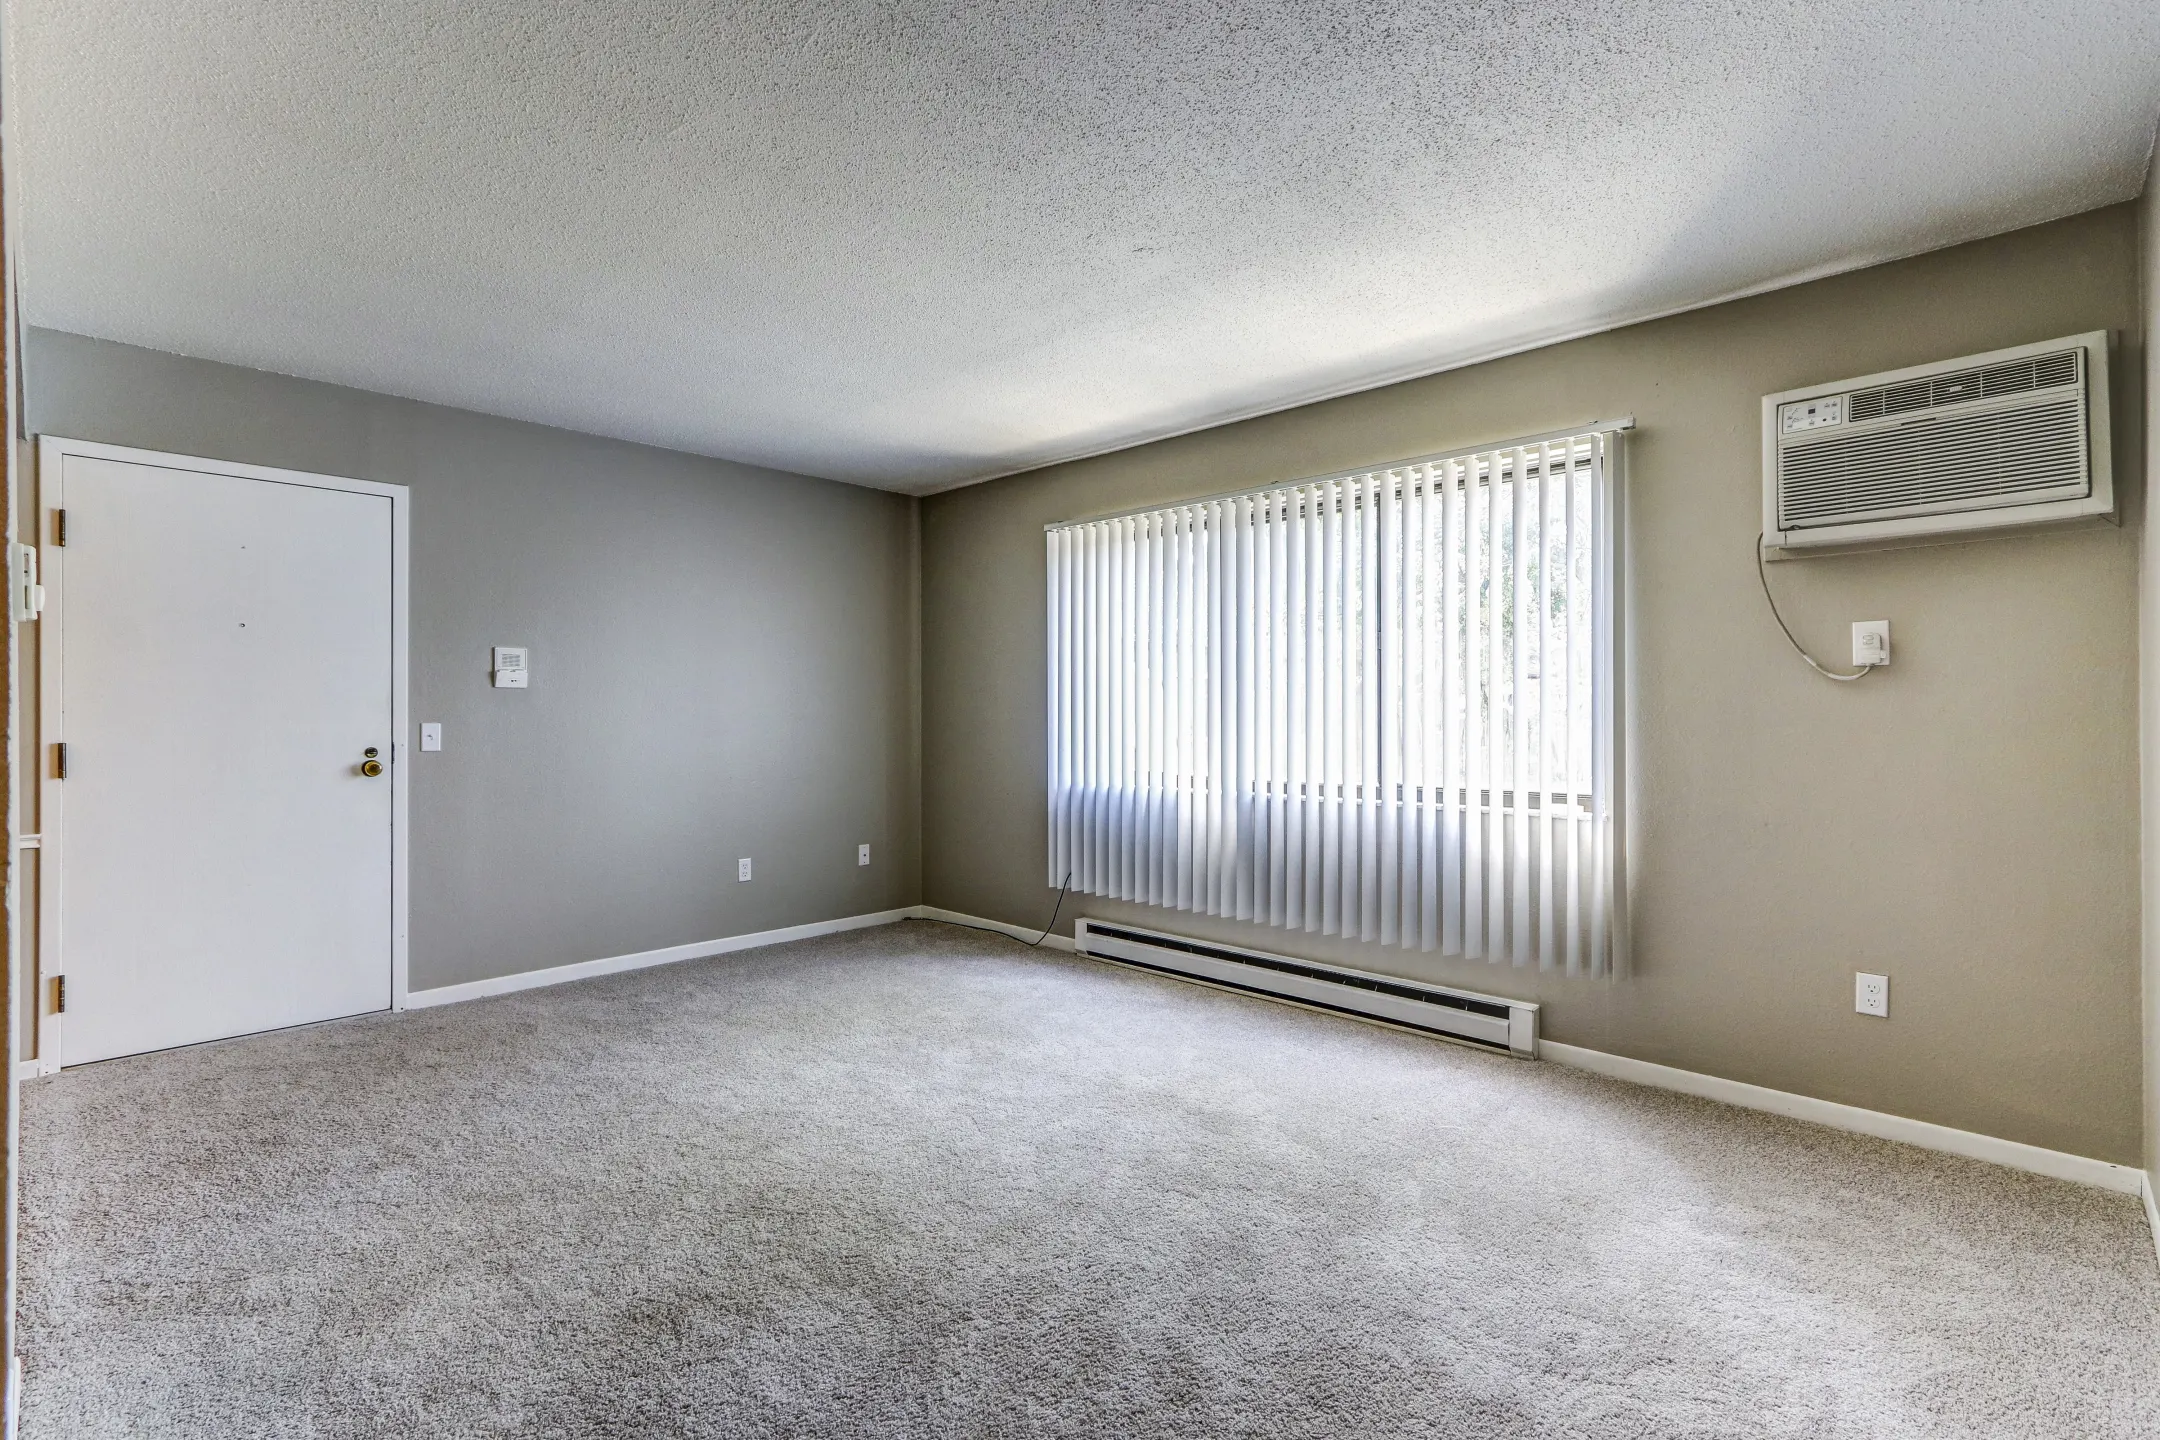 Living Room - Westridge Apartments And Townhomes - Toledo, OH